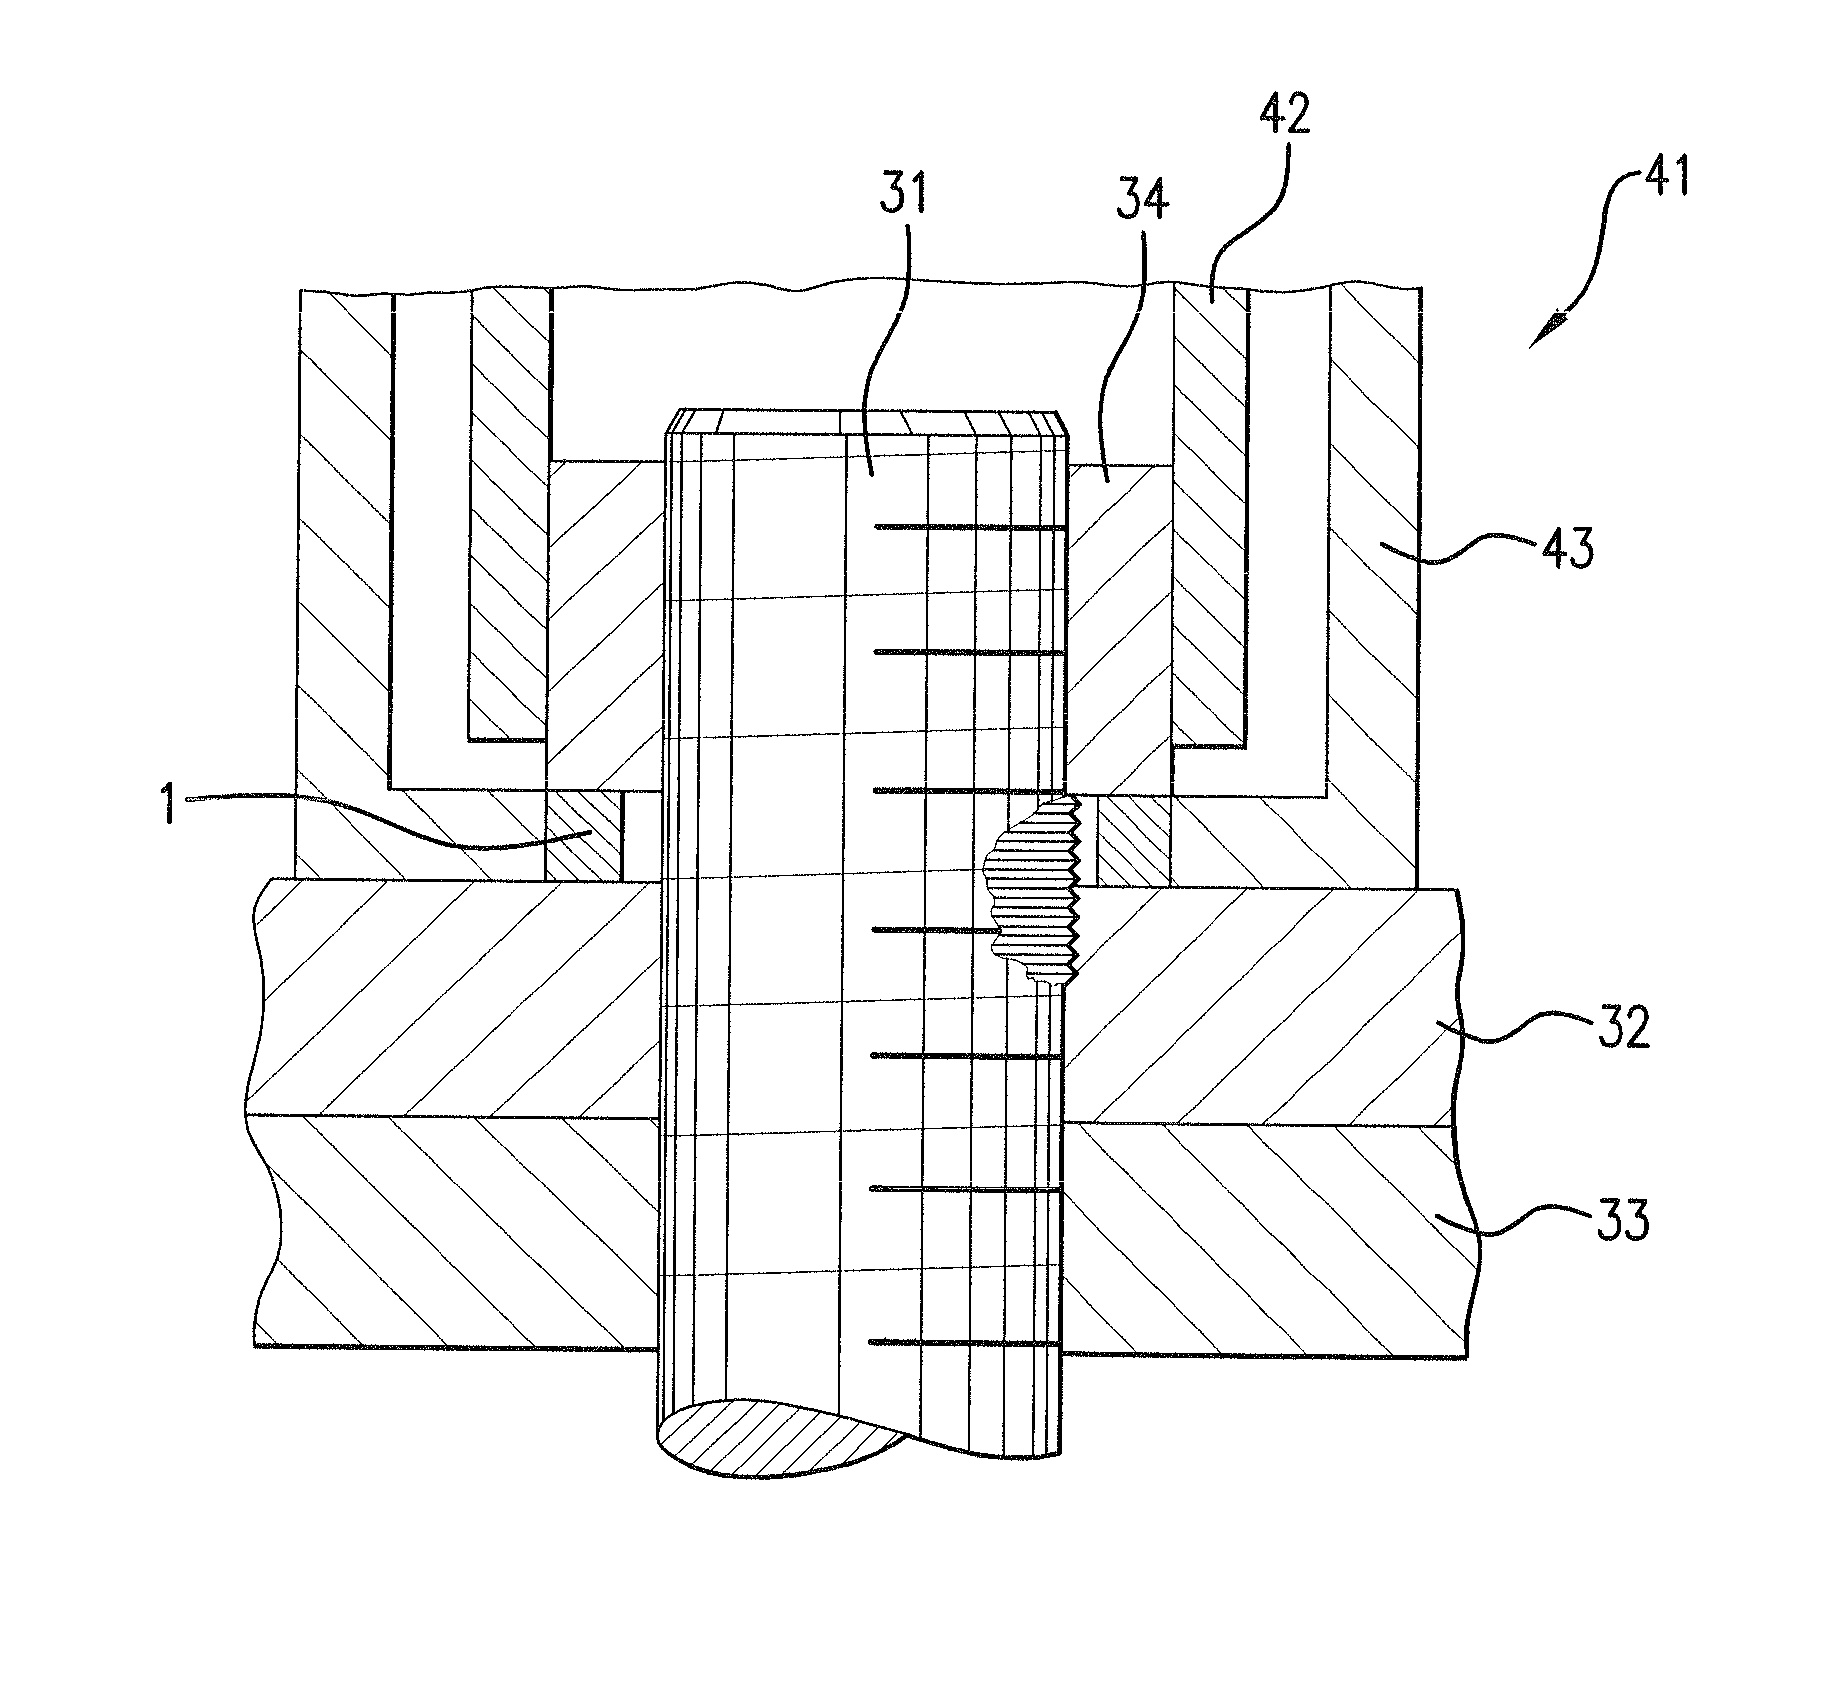 Method for tightening and loosening threaded connectors